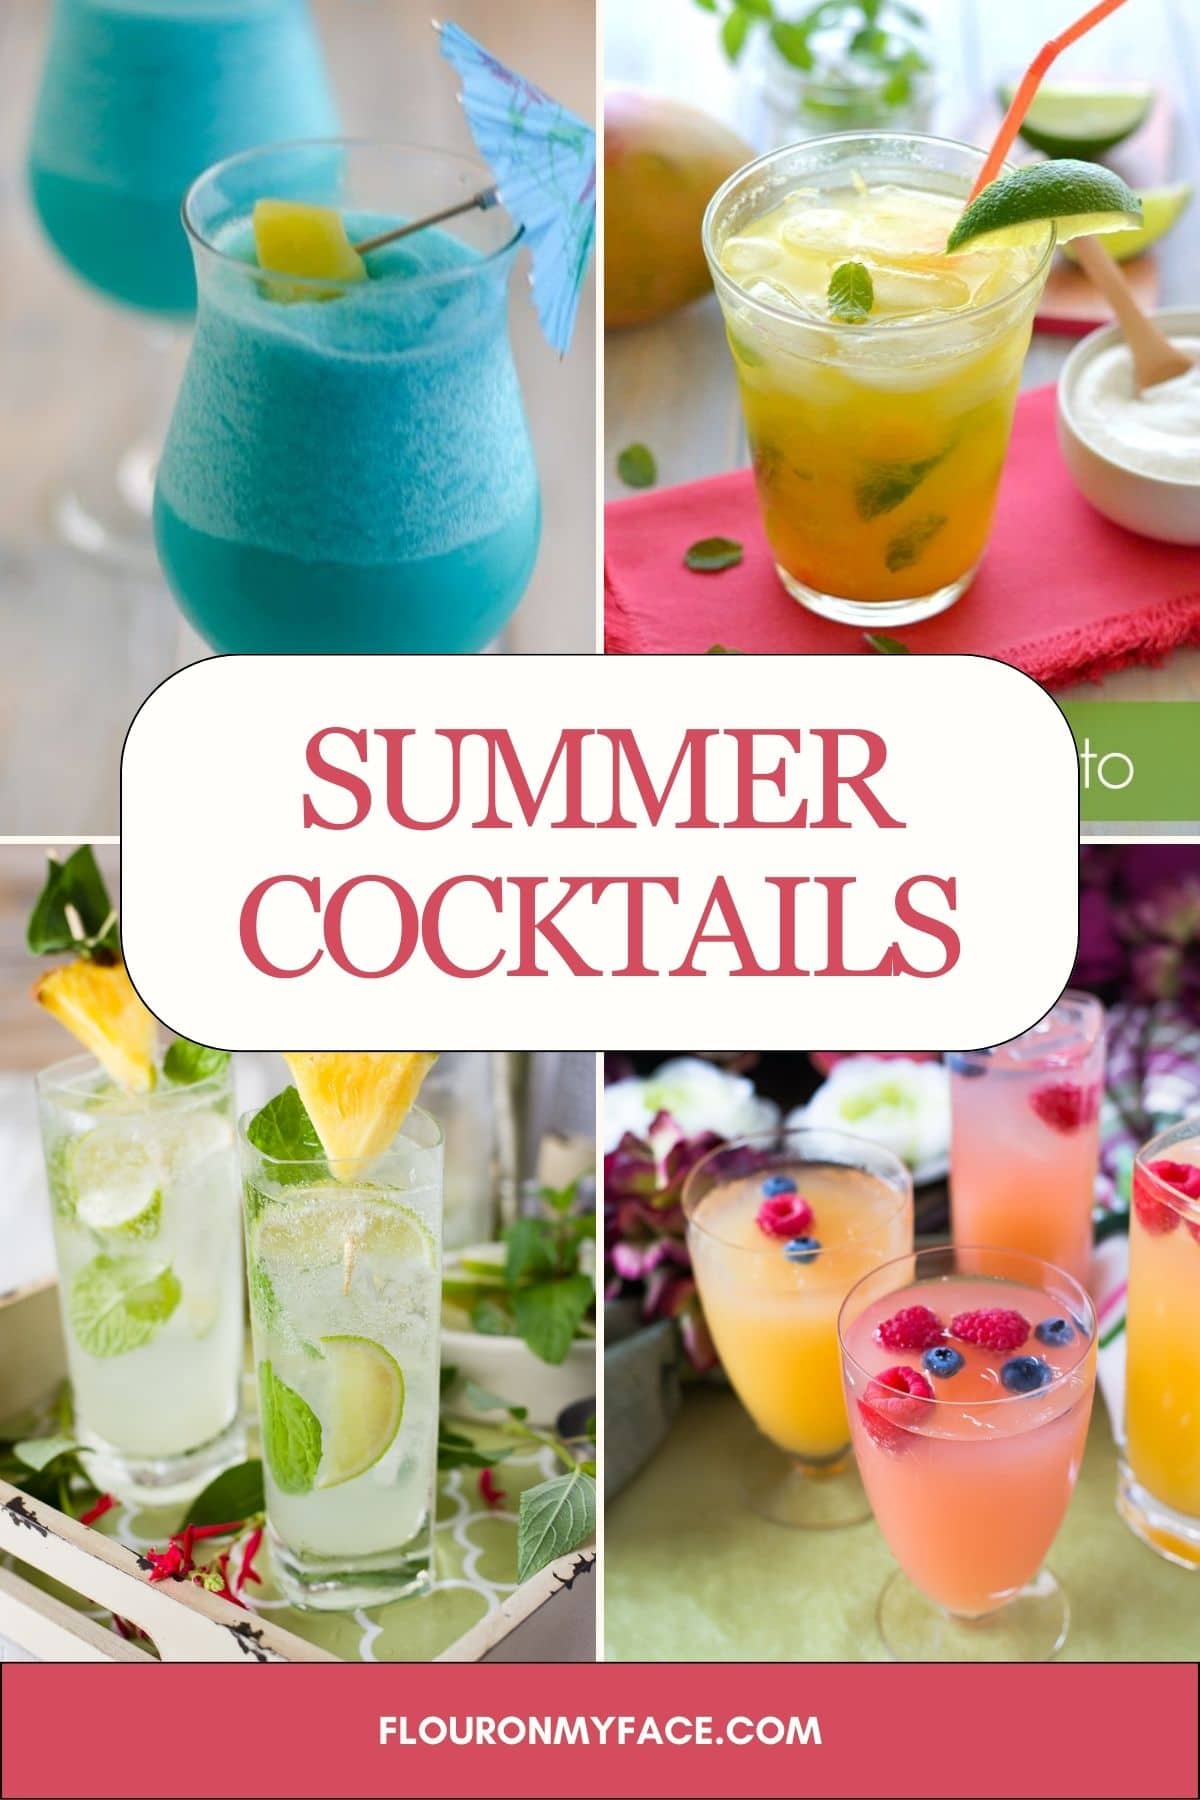 Collage image of summer cocktails recipes.